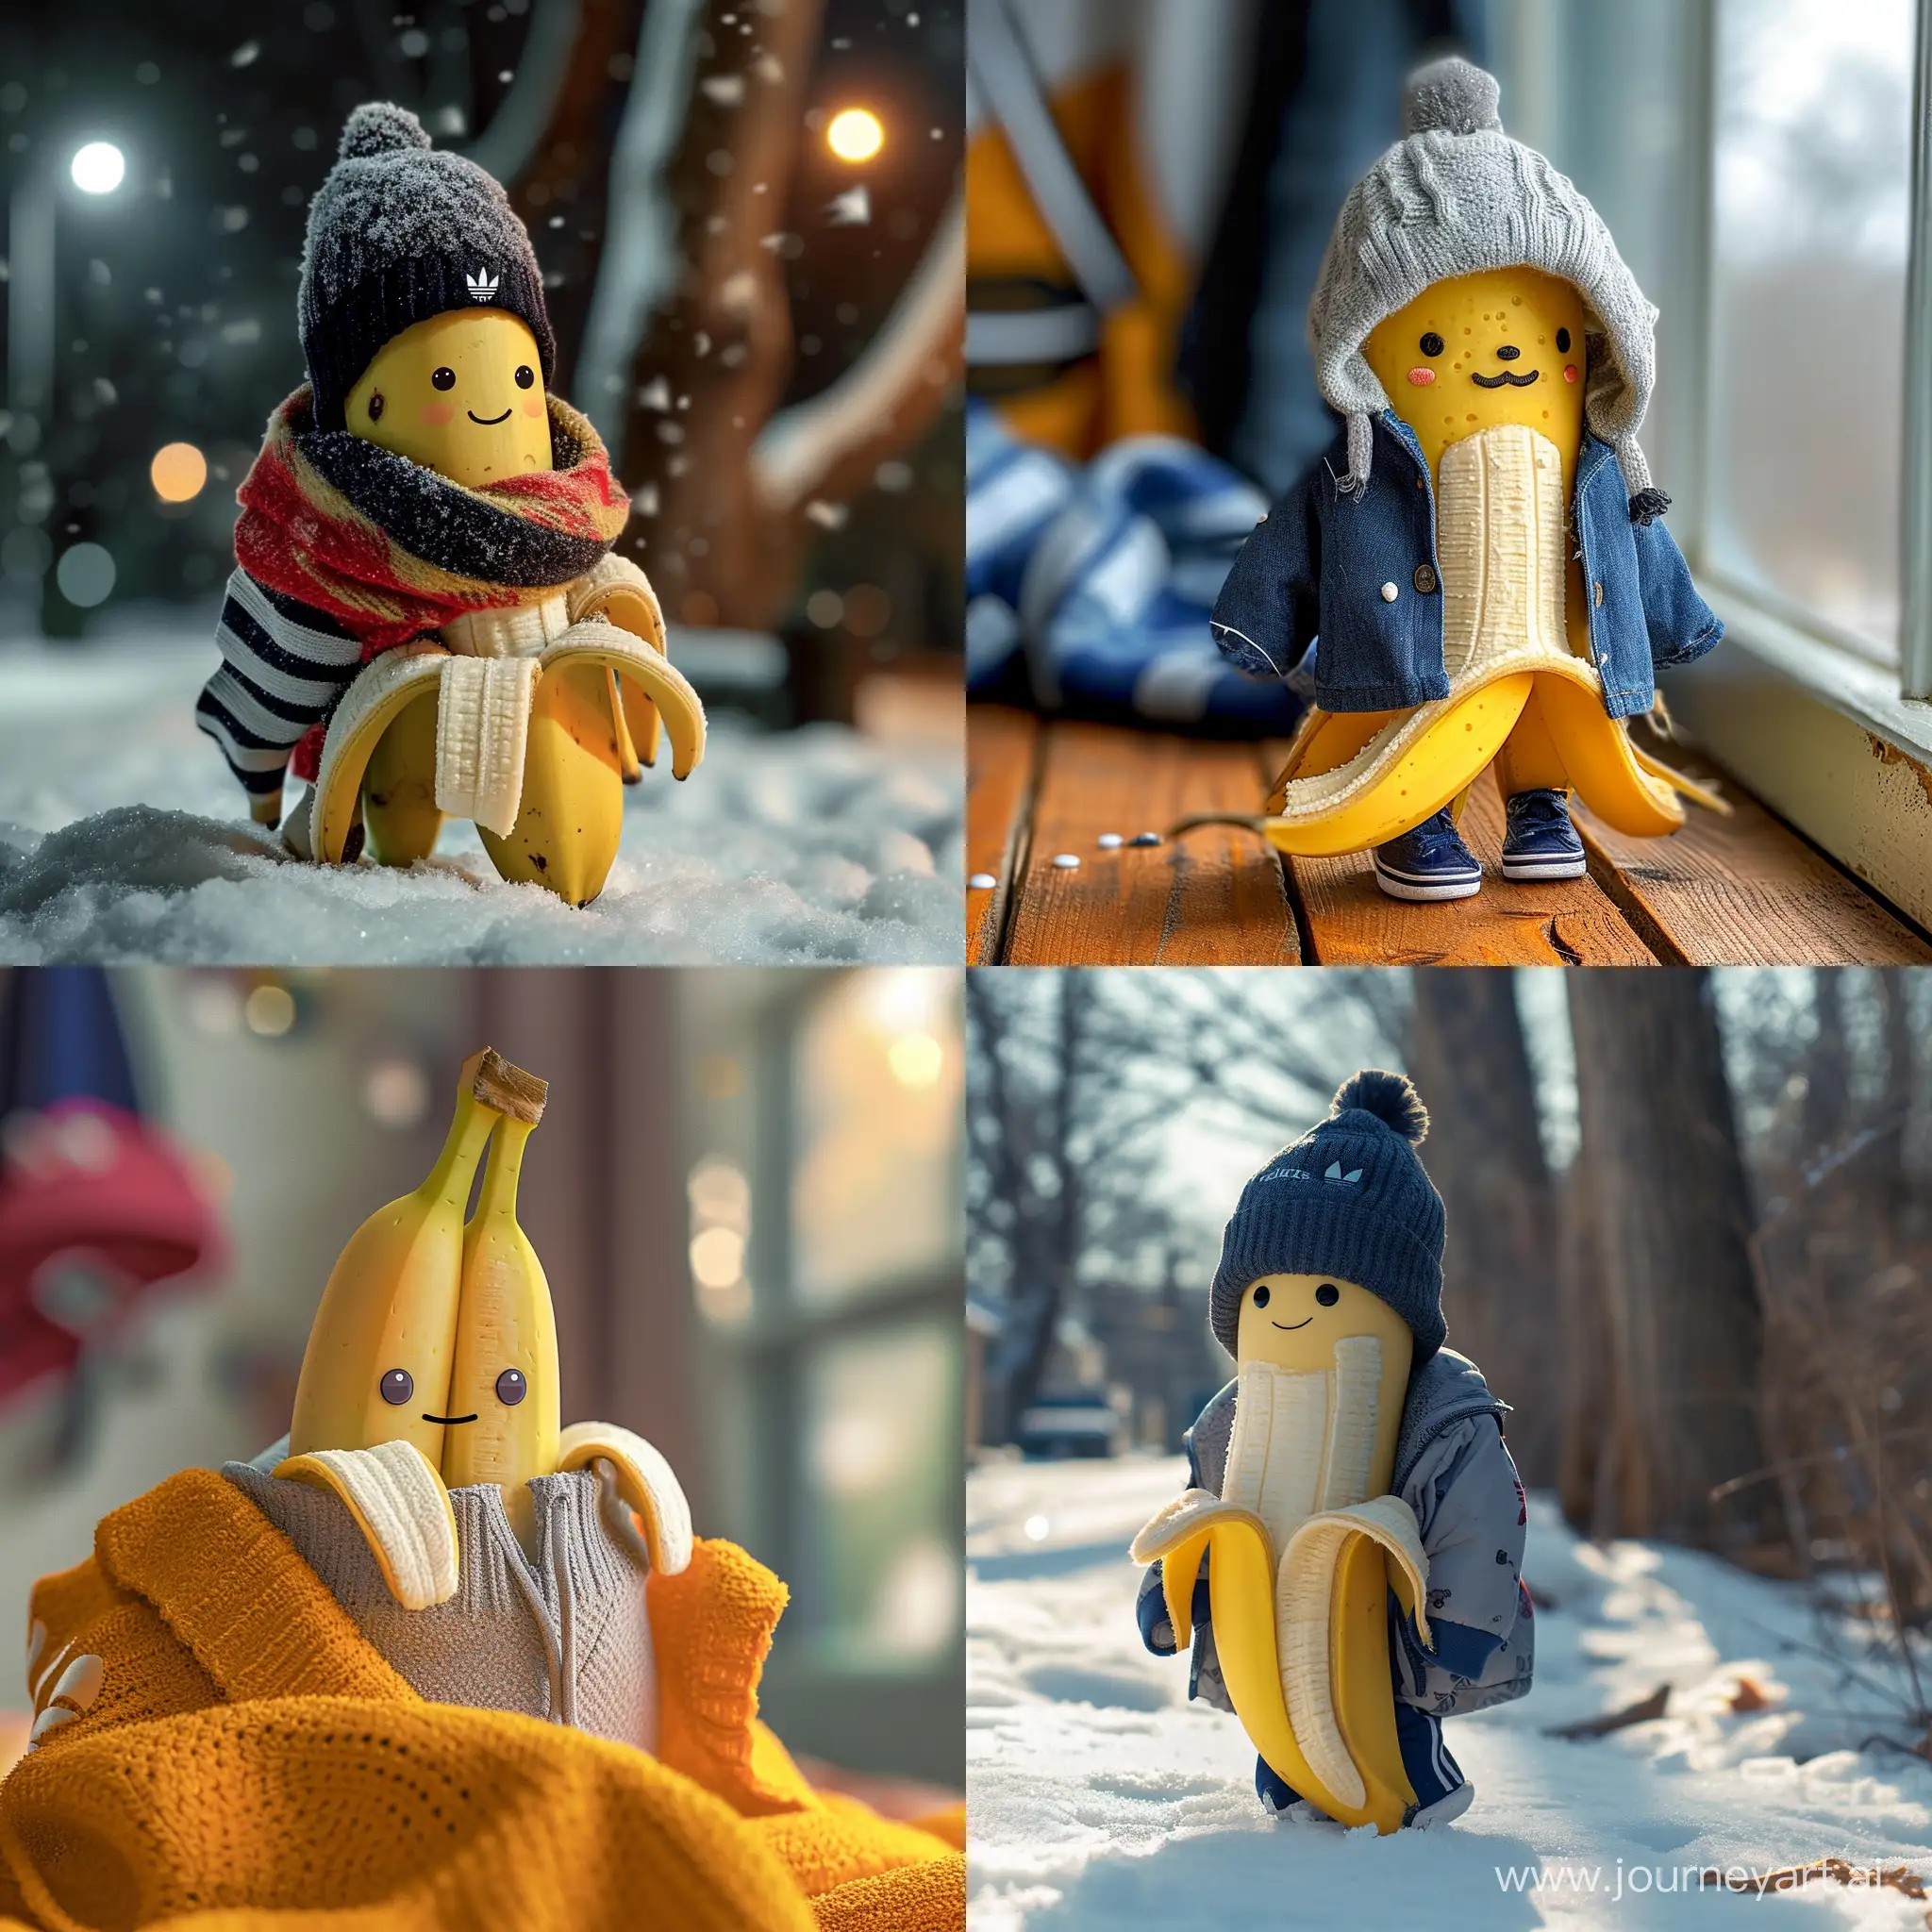 Adorable-Banana-in-Winter-Wearing-adidas-Outfit